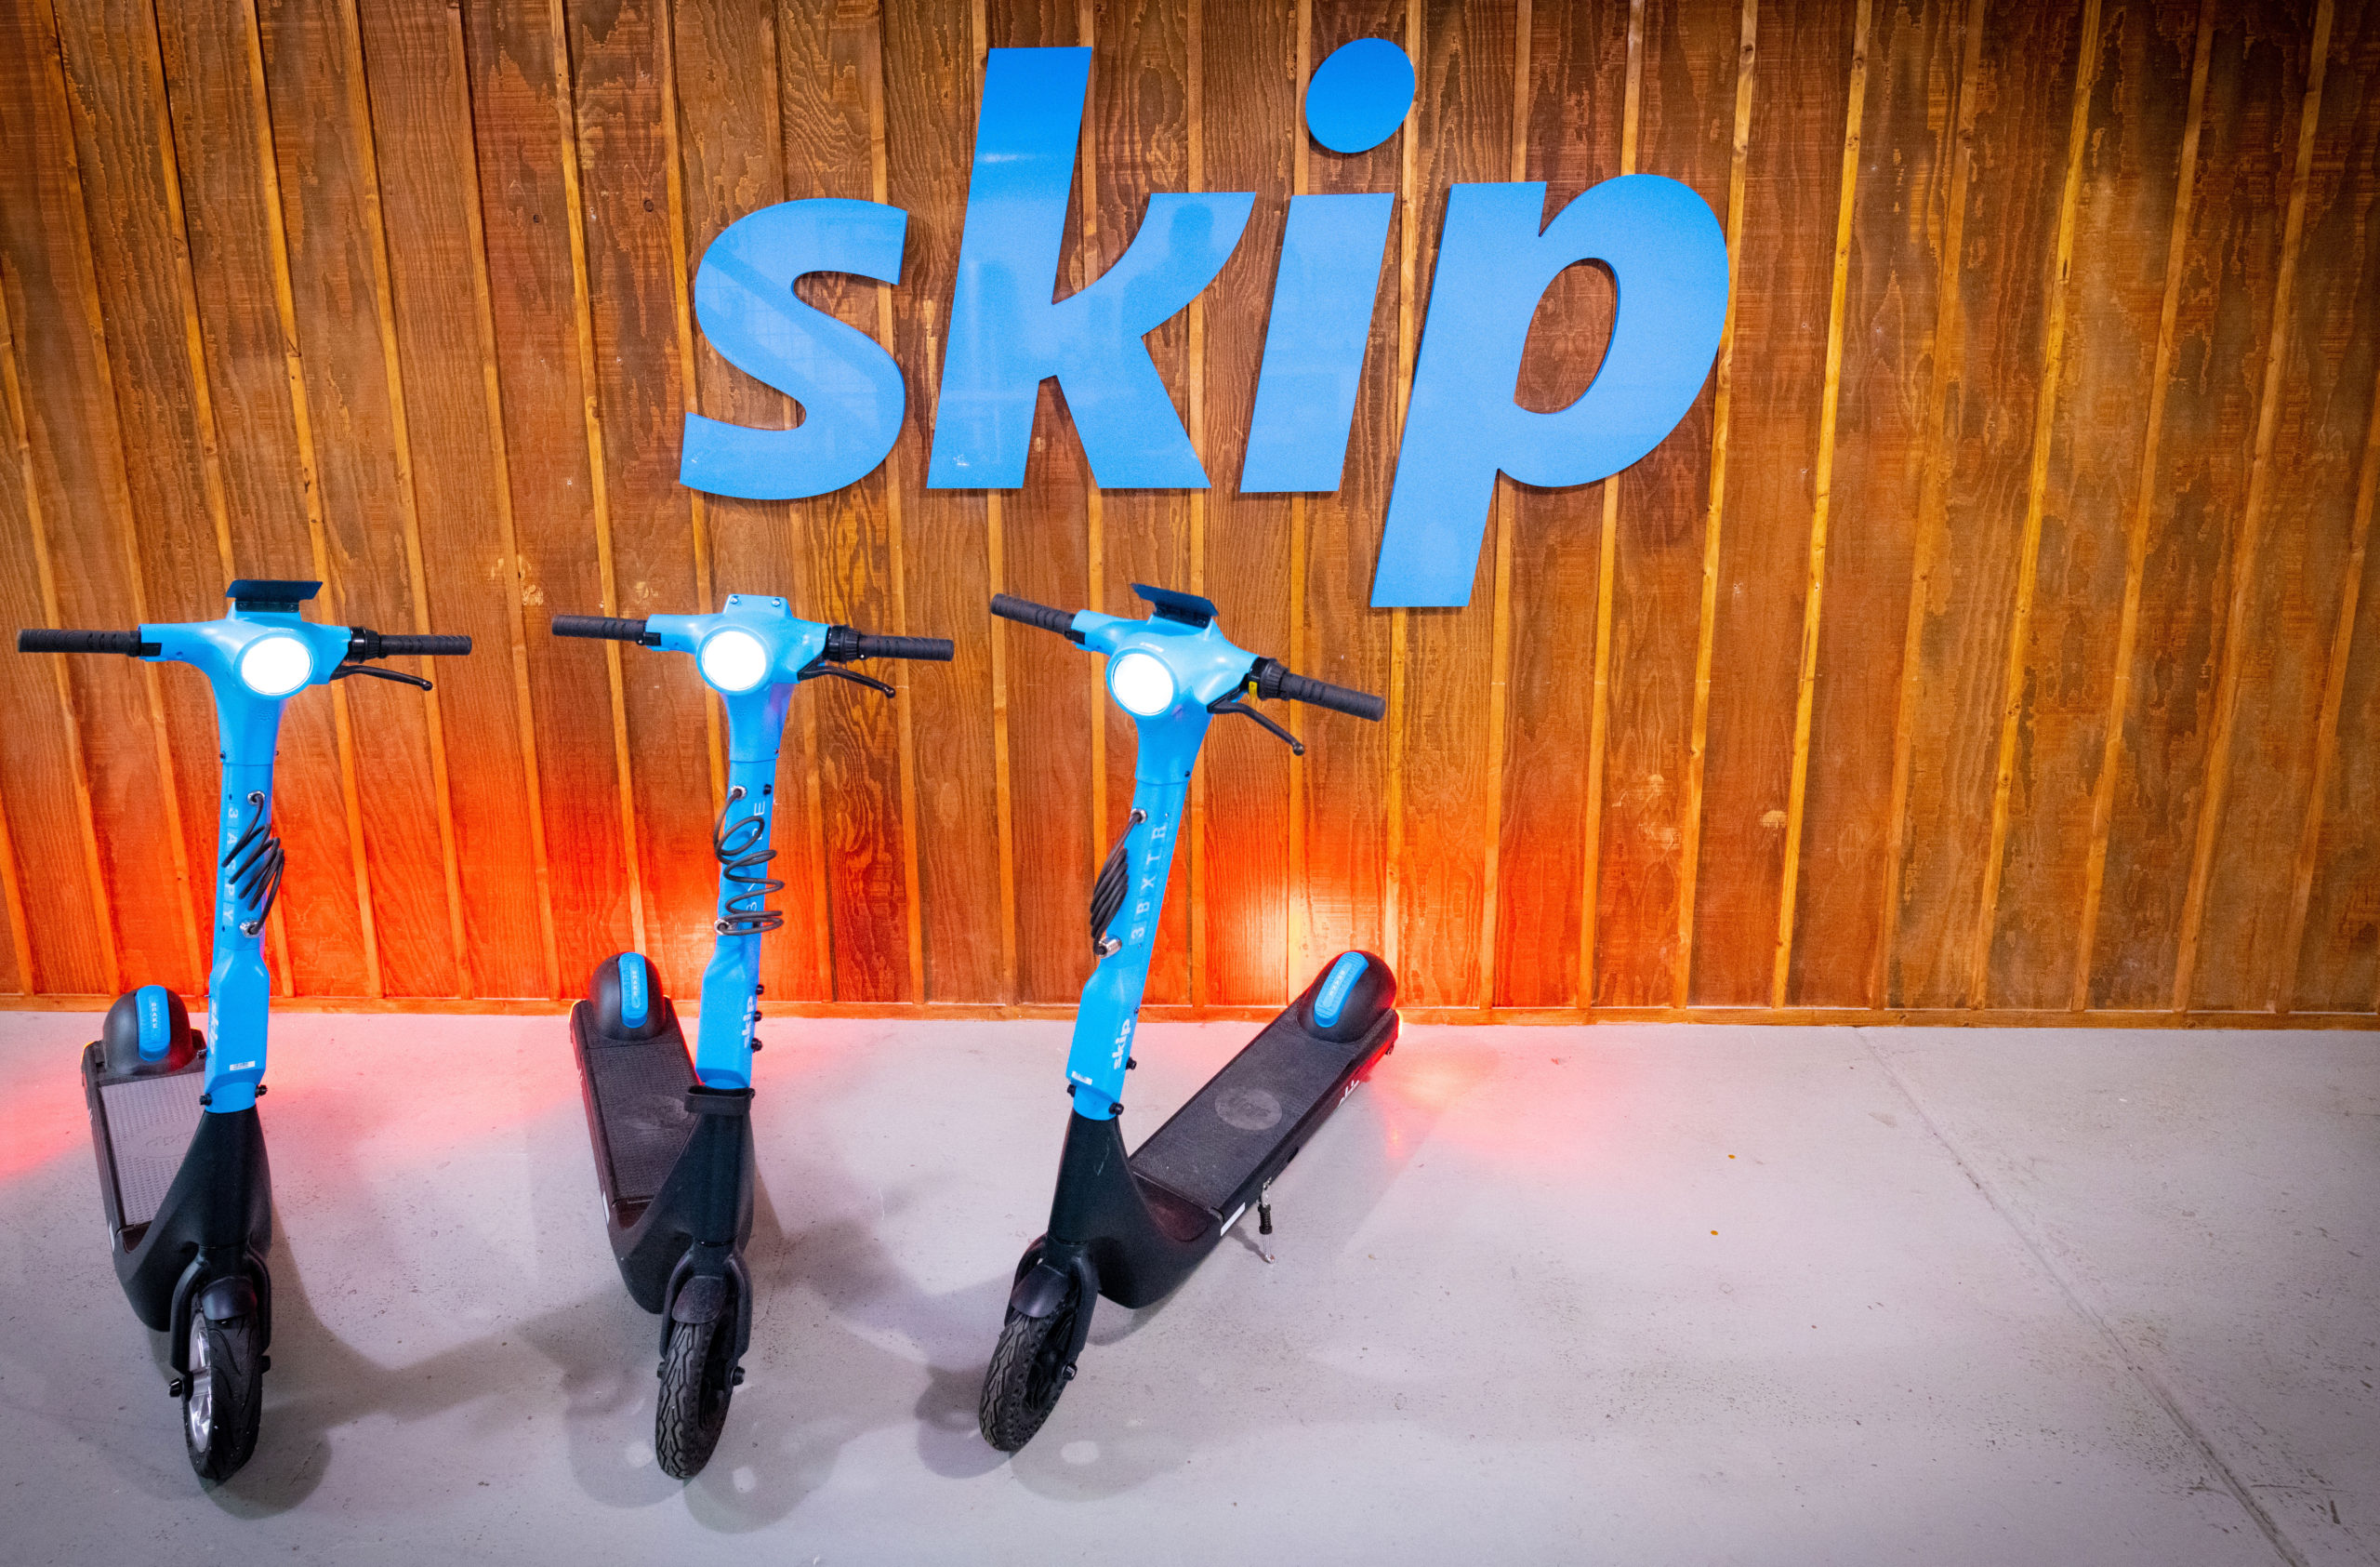 Micro-Mobility Leader, Helbiz, Signs Letter of Intent to Acquire Skip’s Operations to Expand to the West Coast